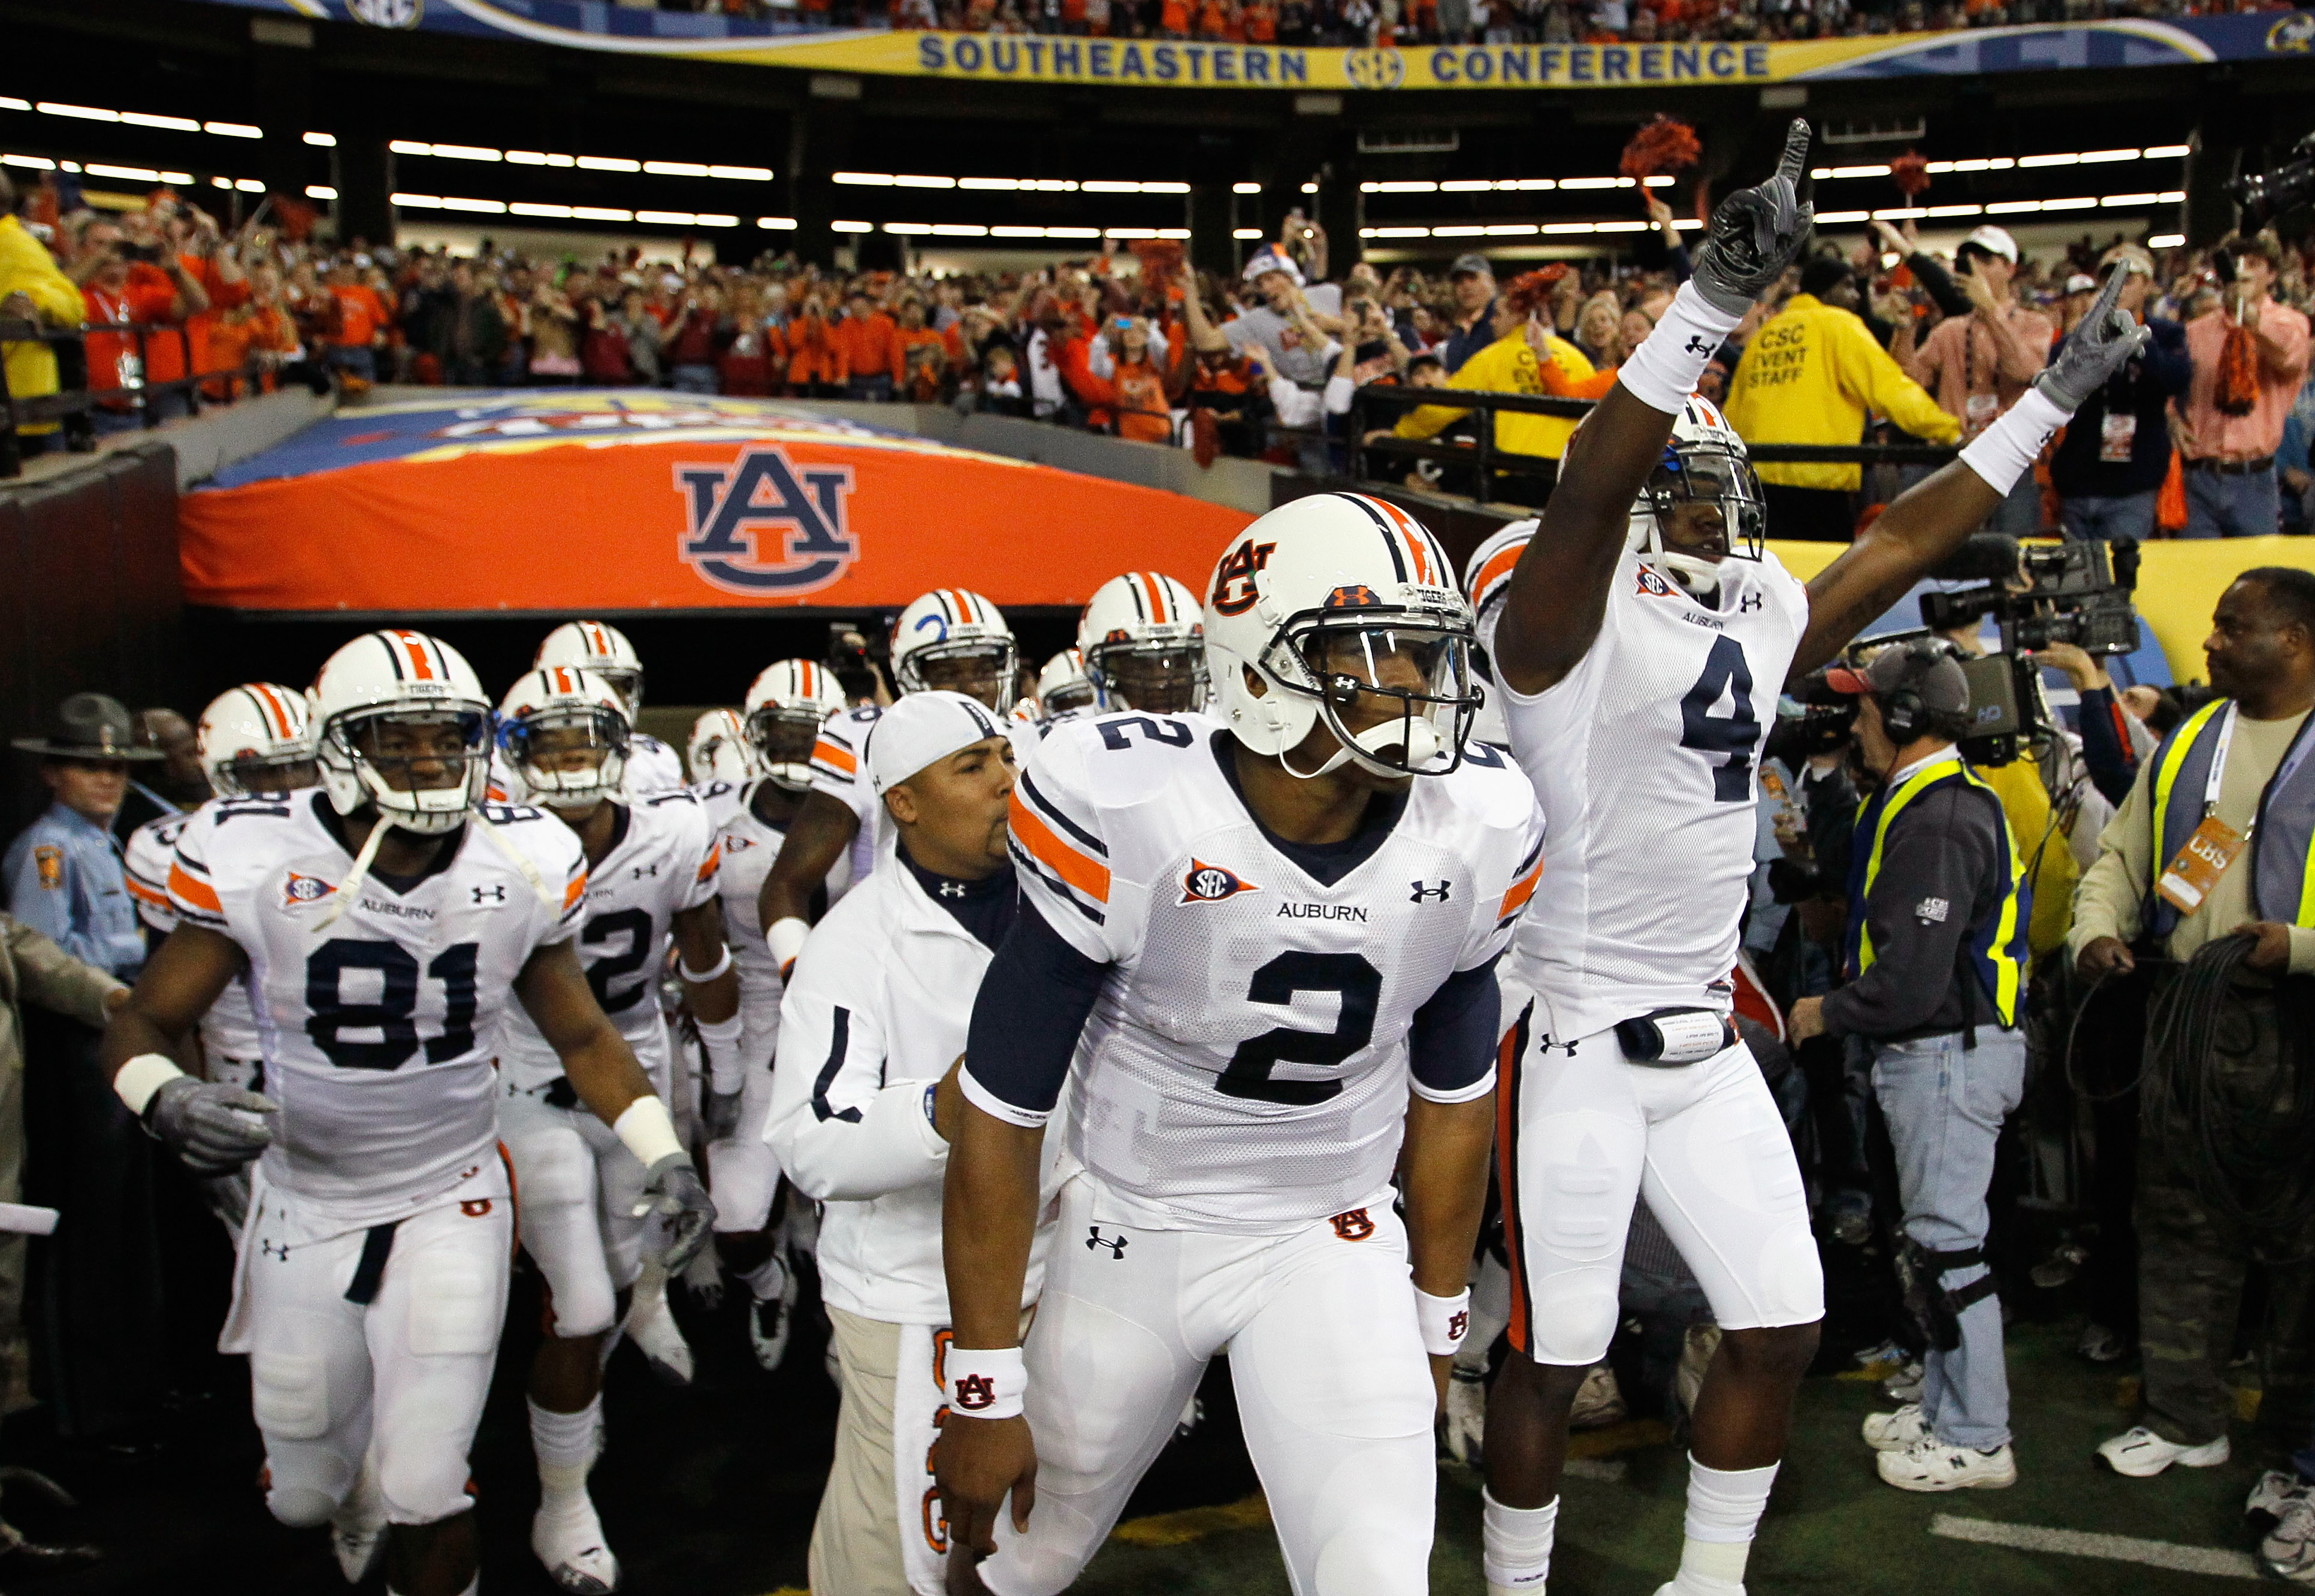 Auburn University: BCS 2011 Champions, After a Quirky Game